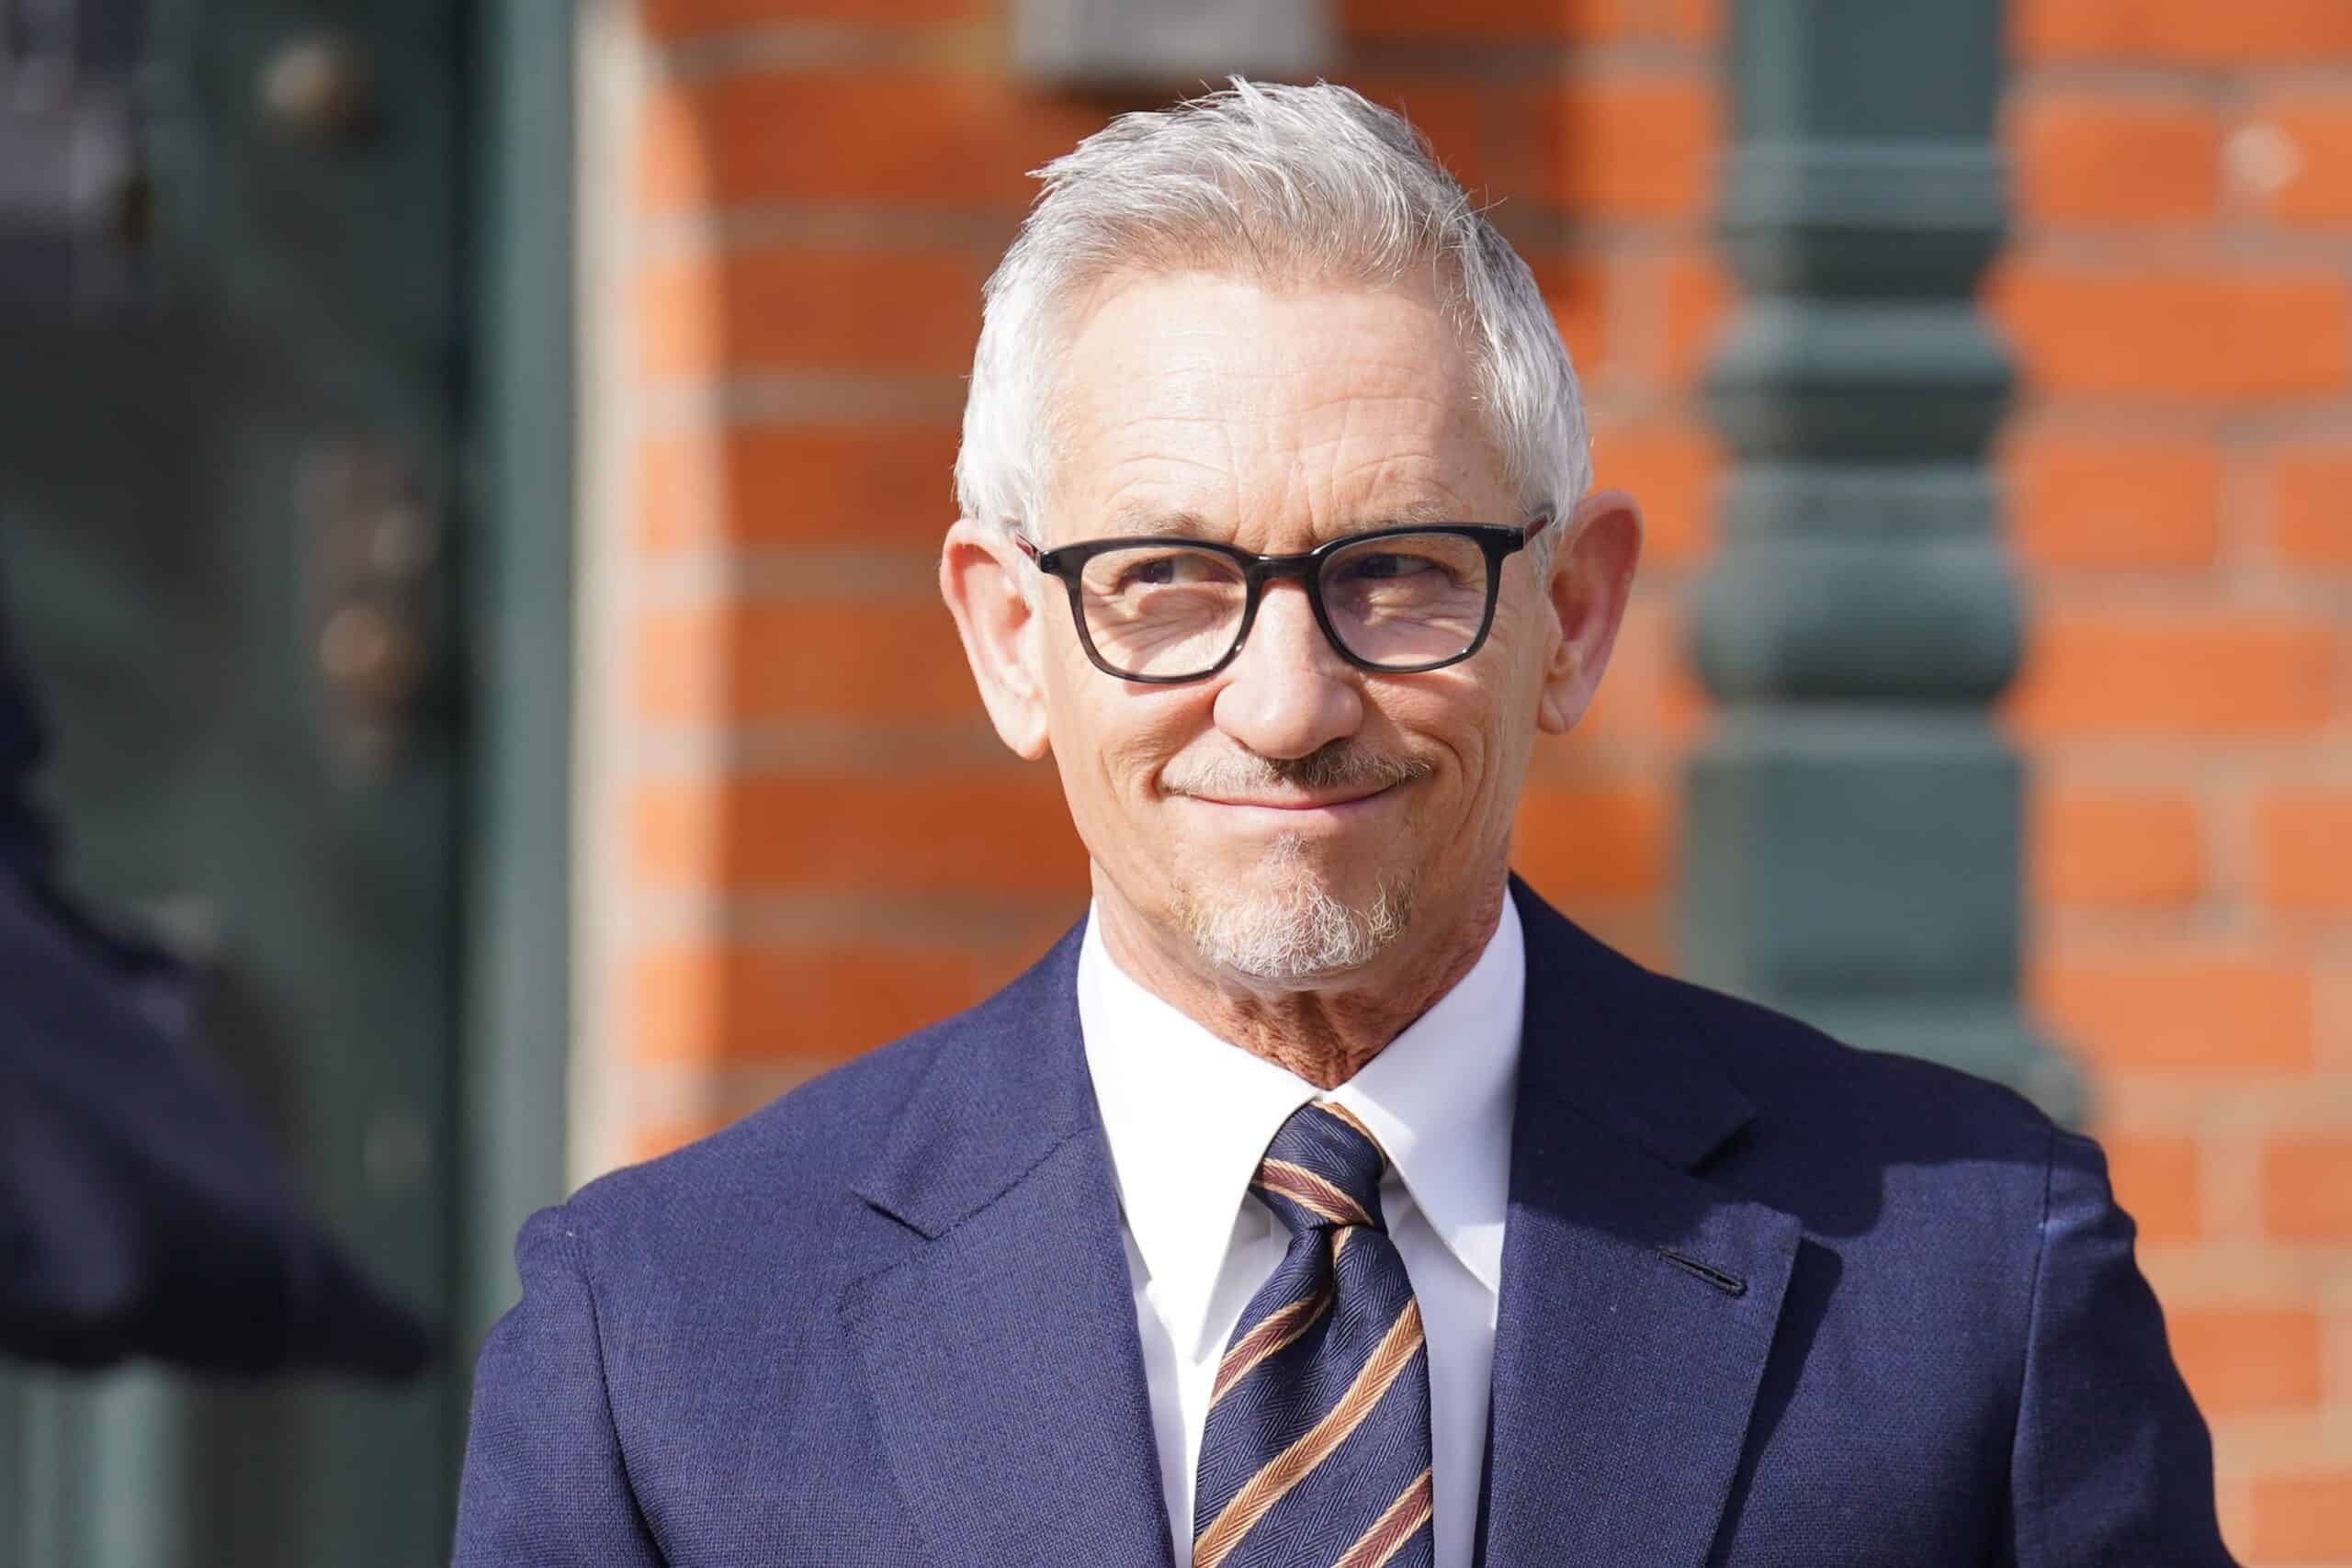 Labour compares Gary Lineker being taken off air to ‘Putin’s Russia’